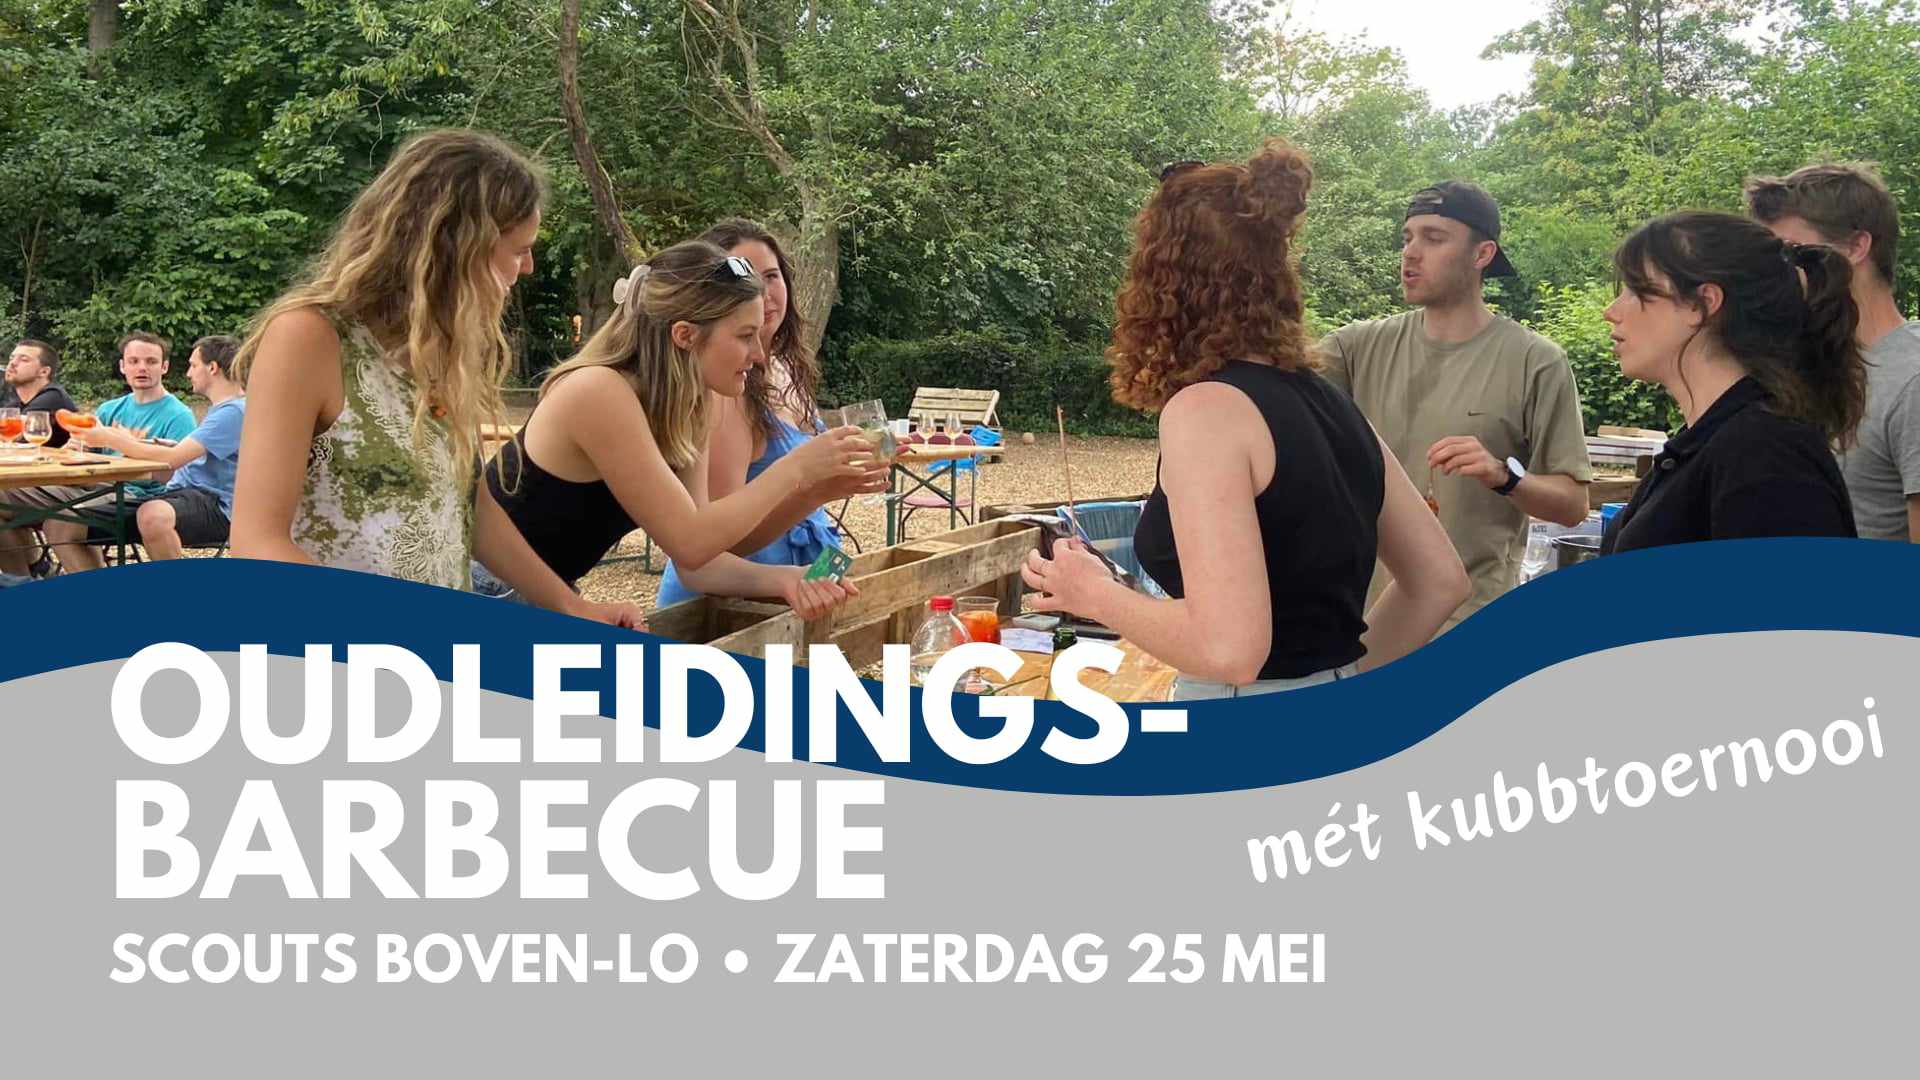 Oudleidingsbarbecue